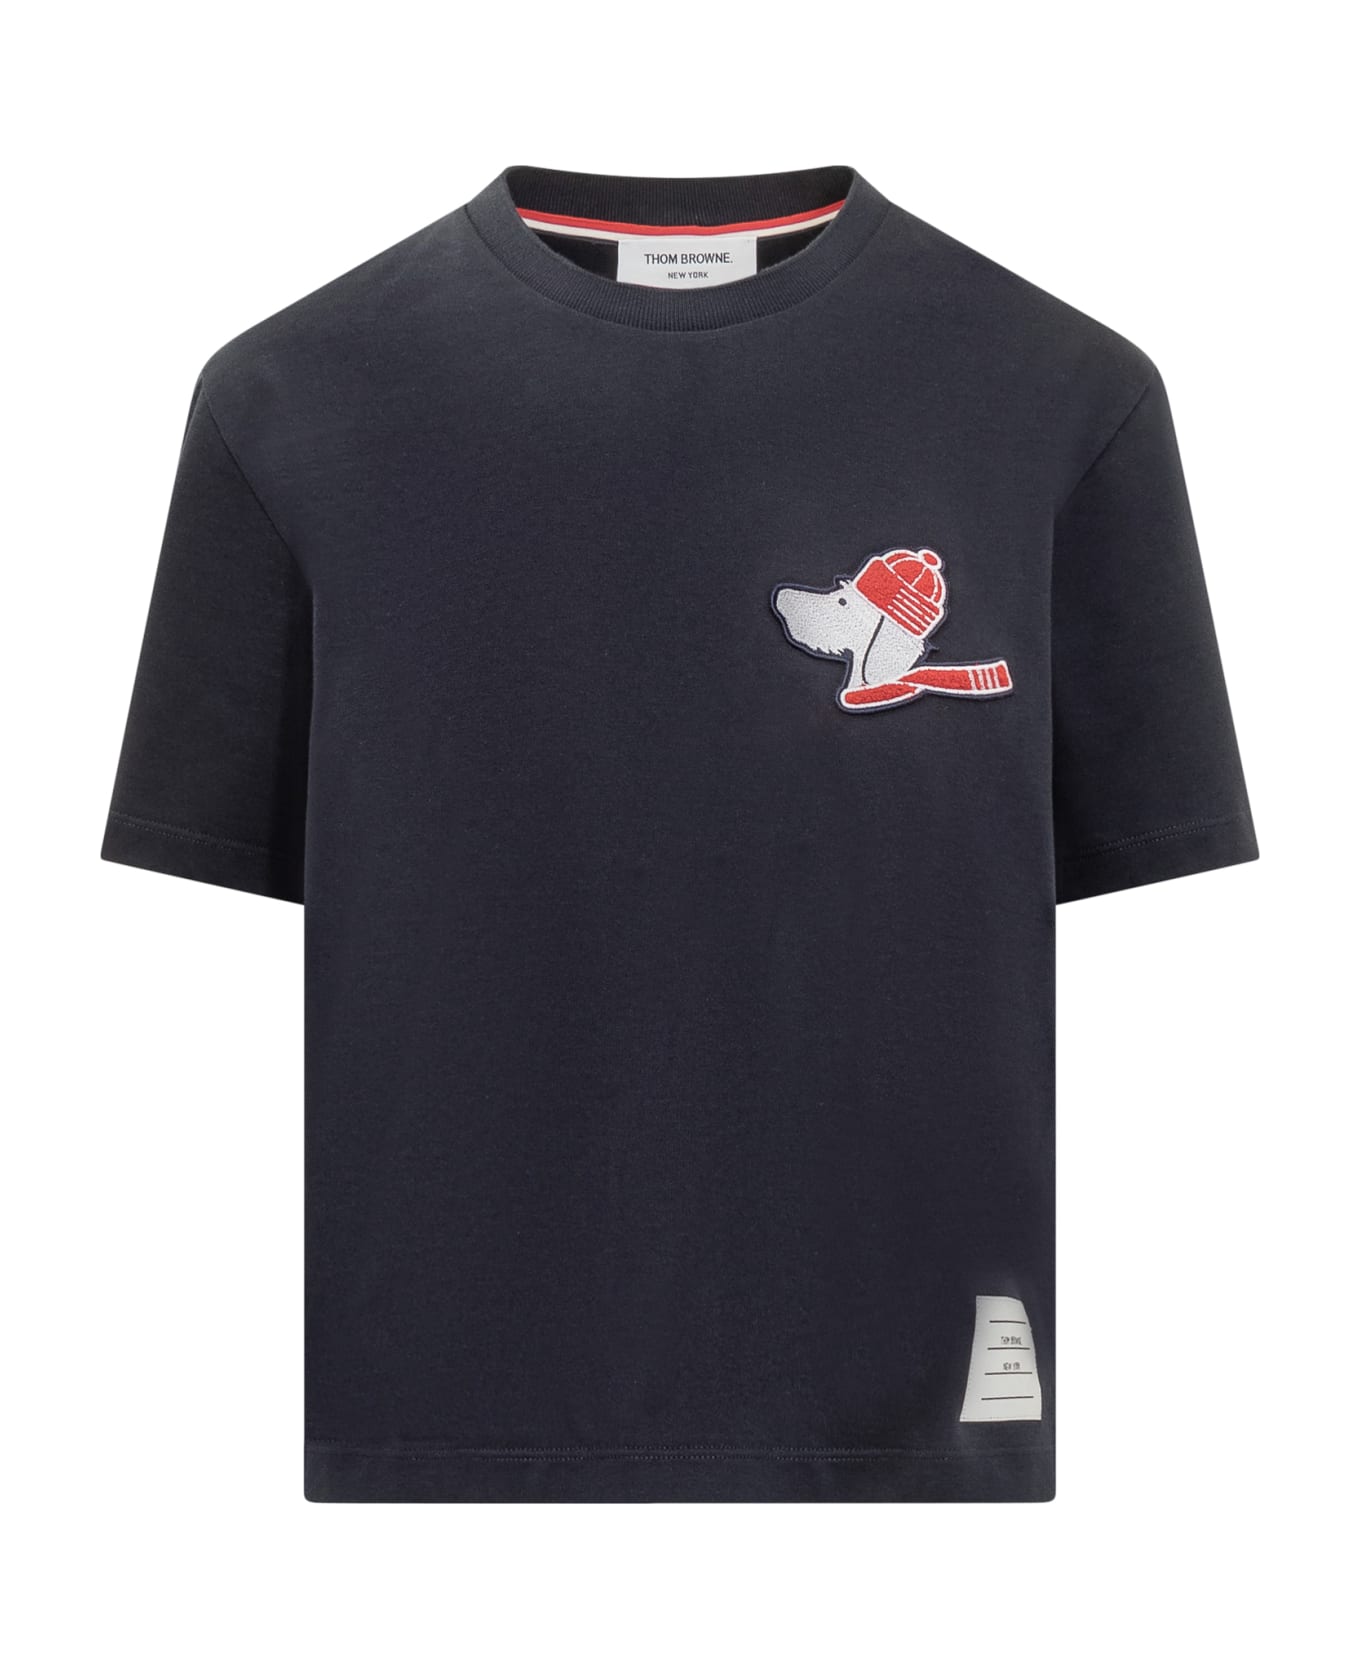 Thom Browne Hector T-shirt - NAVY